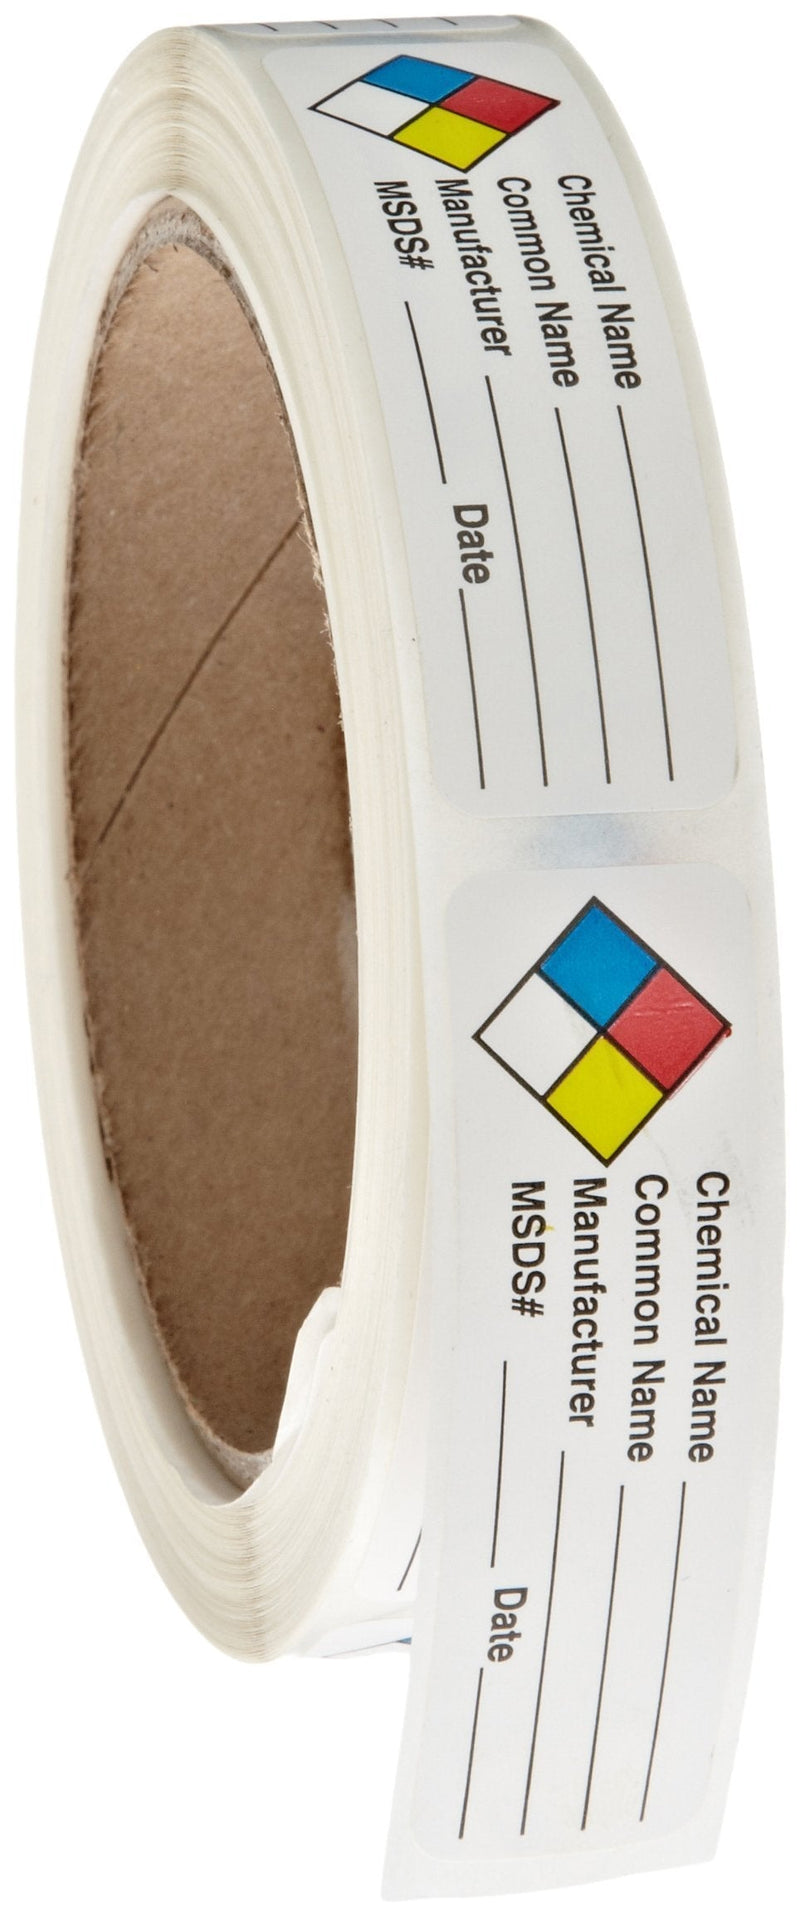 Roll Products 163-0004 Litho Removable Adhesive HMIG Label with 4 Color Imprint, Chemical Name (with blank), 2-1/2" Length x 3/4" Width, For Identifying and Marking, White (Roll of 250) 1